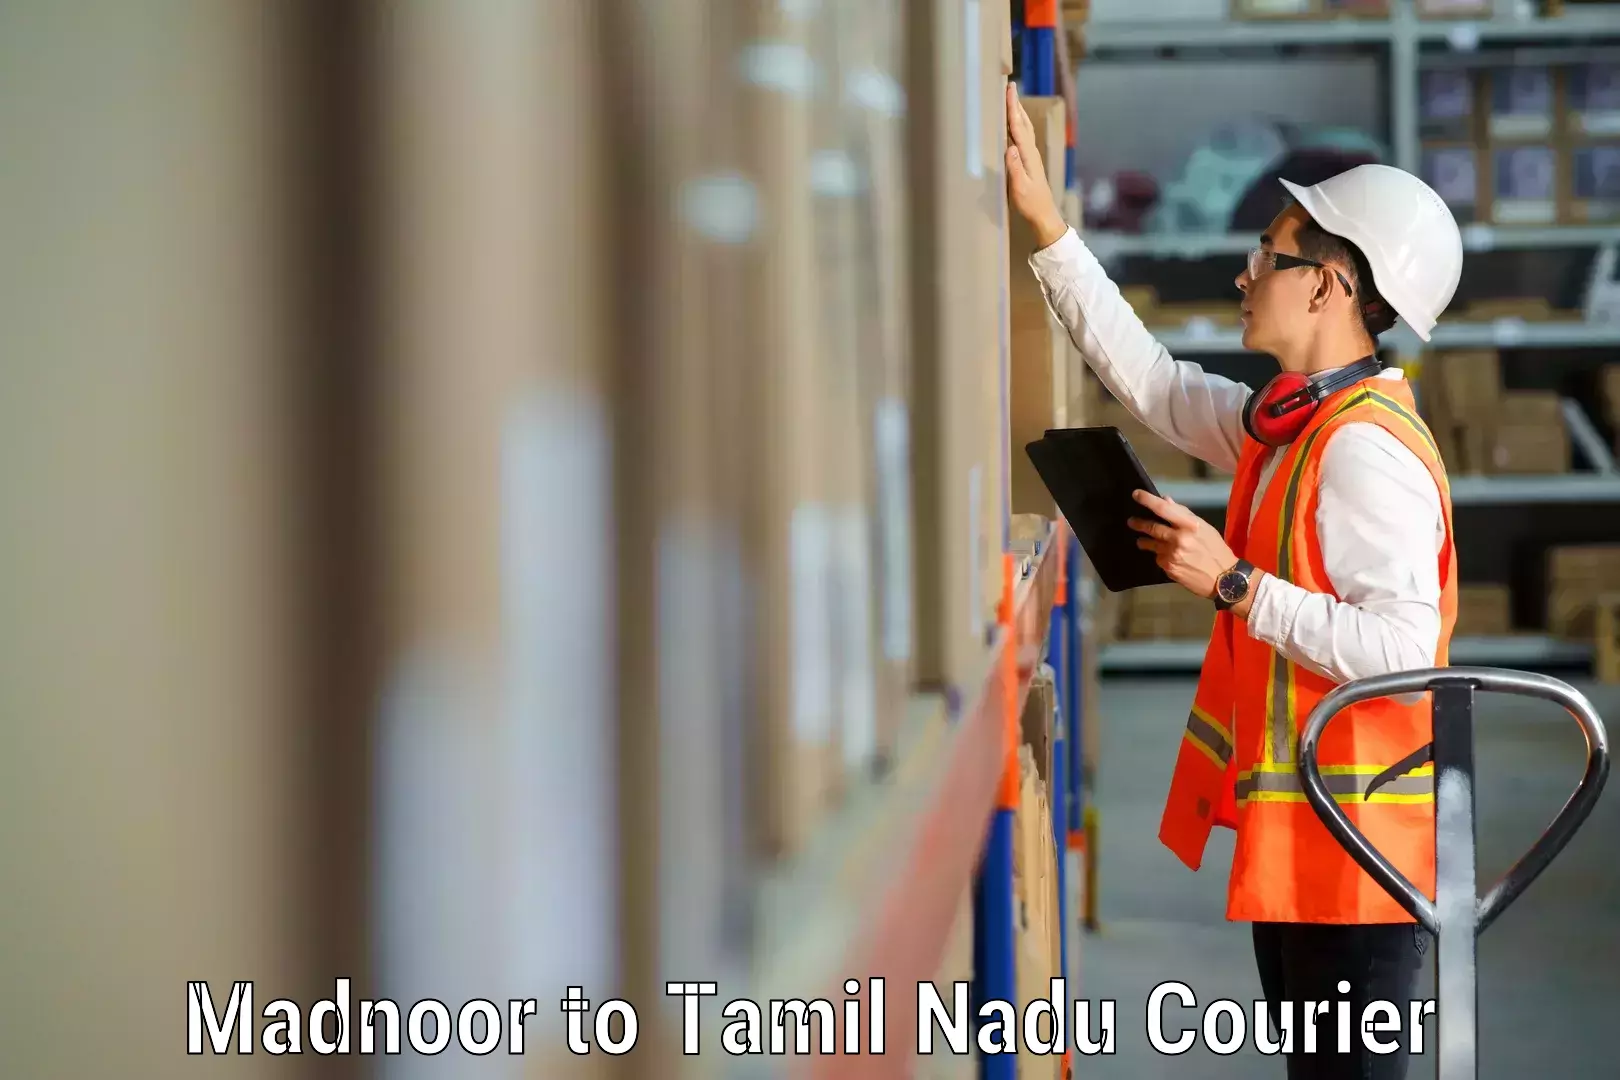 Quality moving company Madnoor to Tamil Nadu